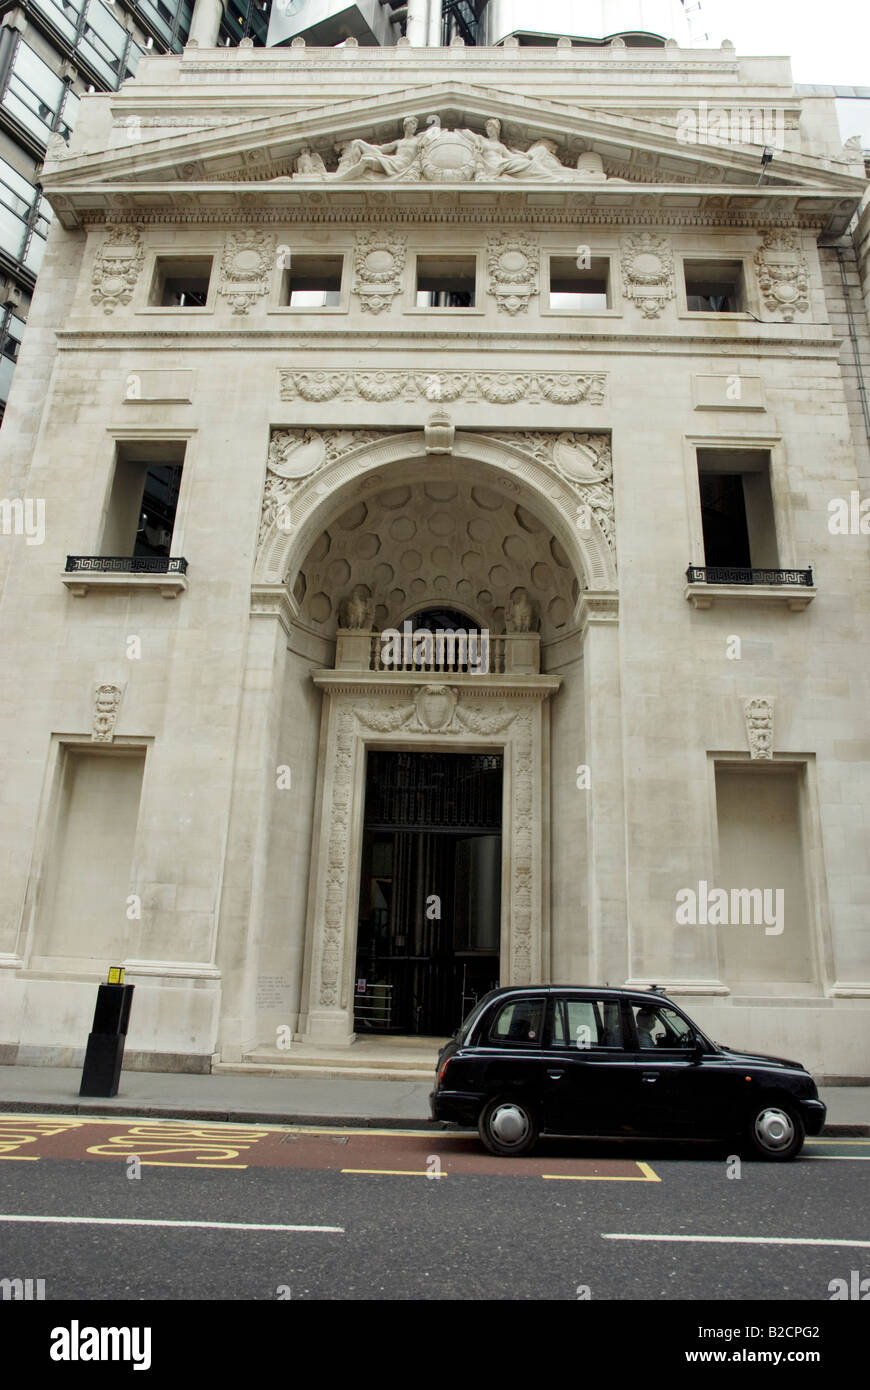 Lloyds of London old building entrance with taxi Stock Photo